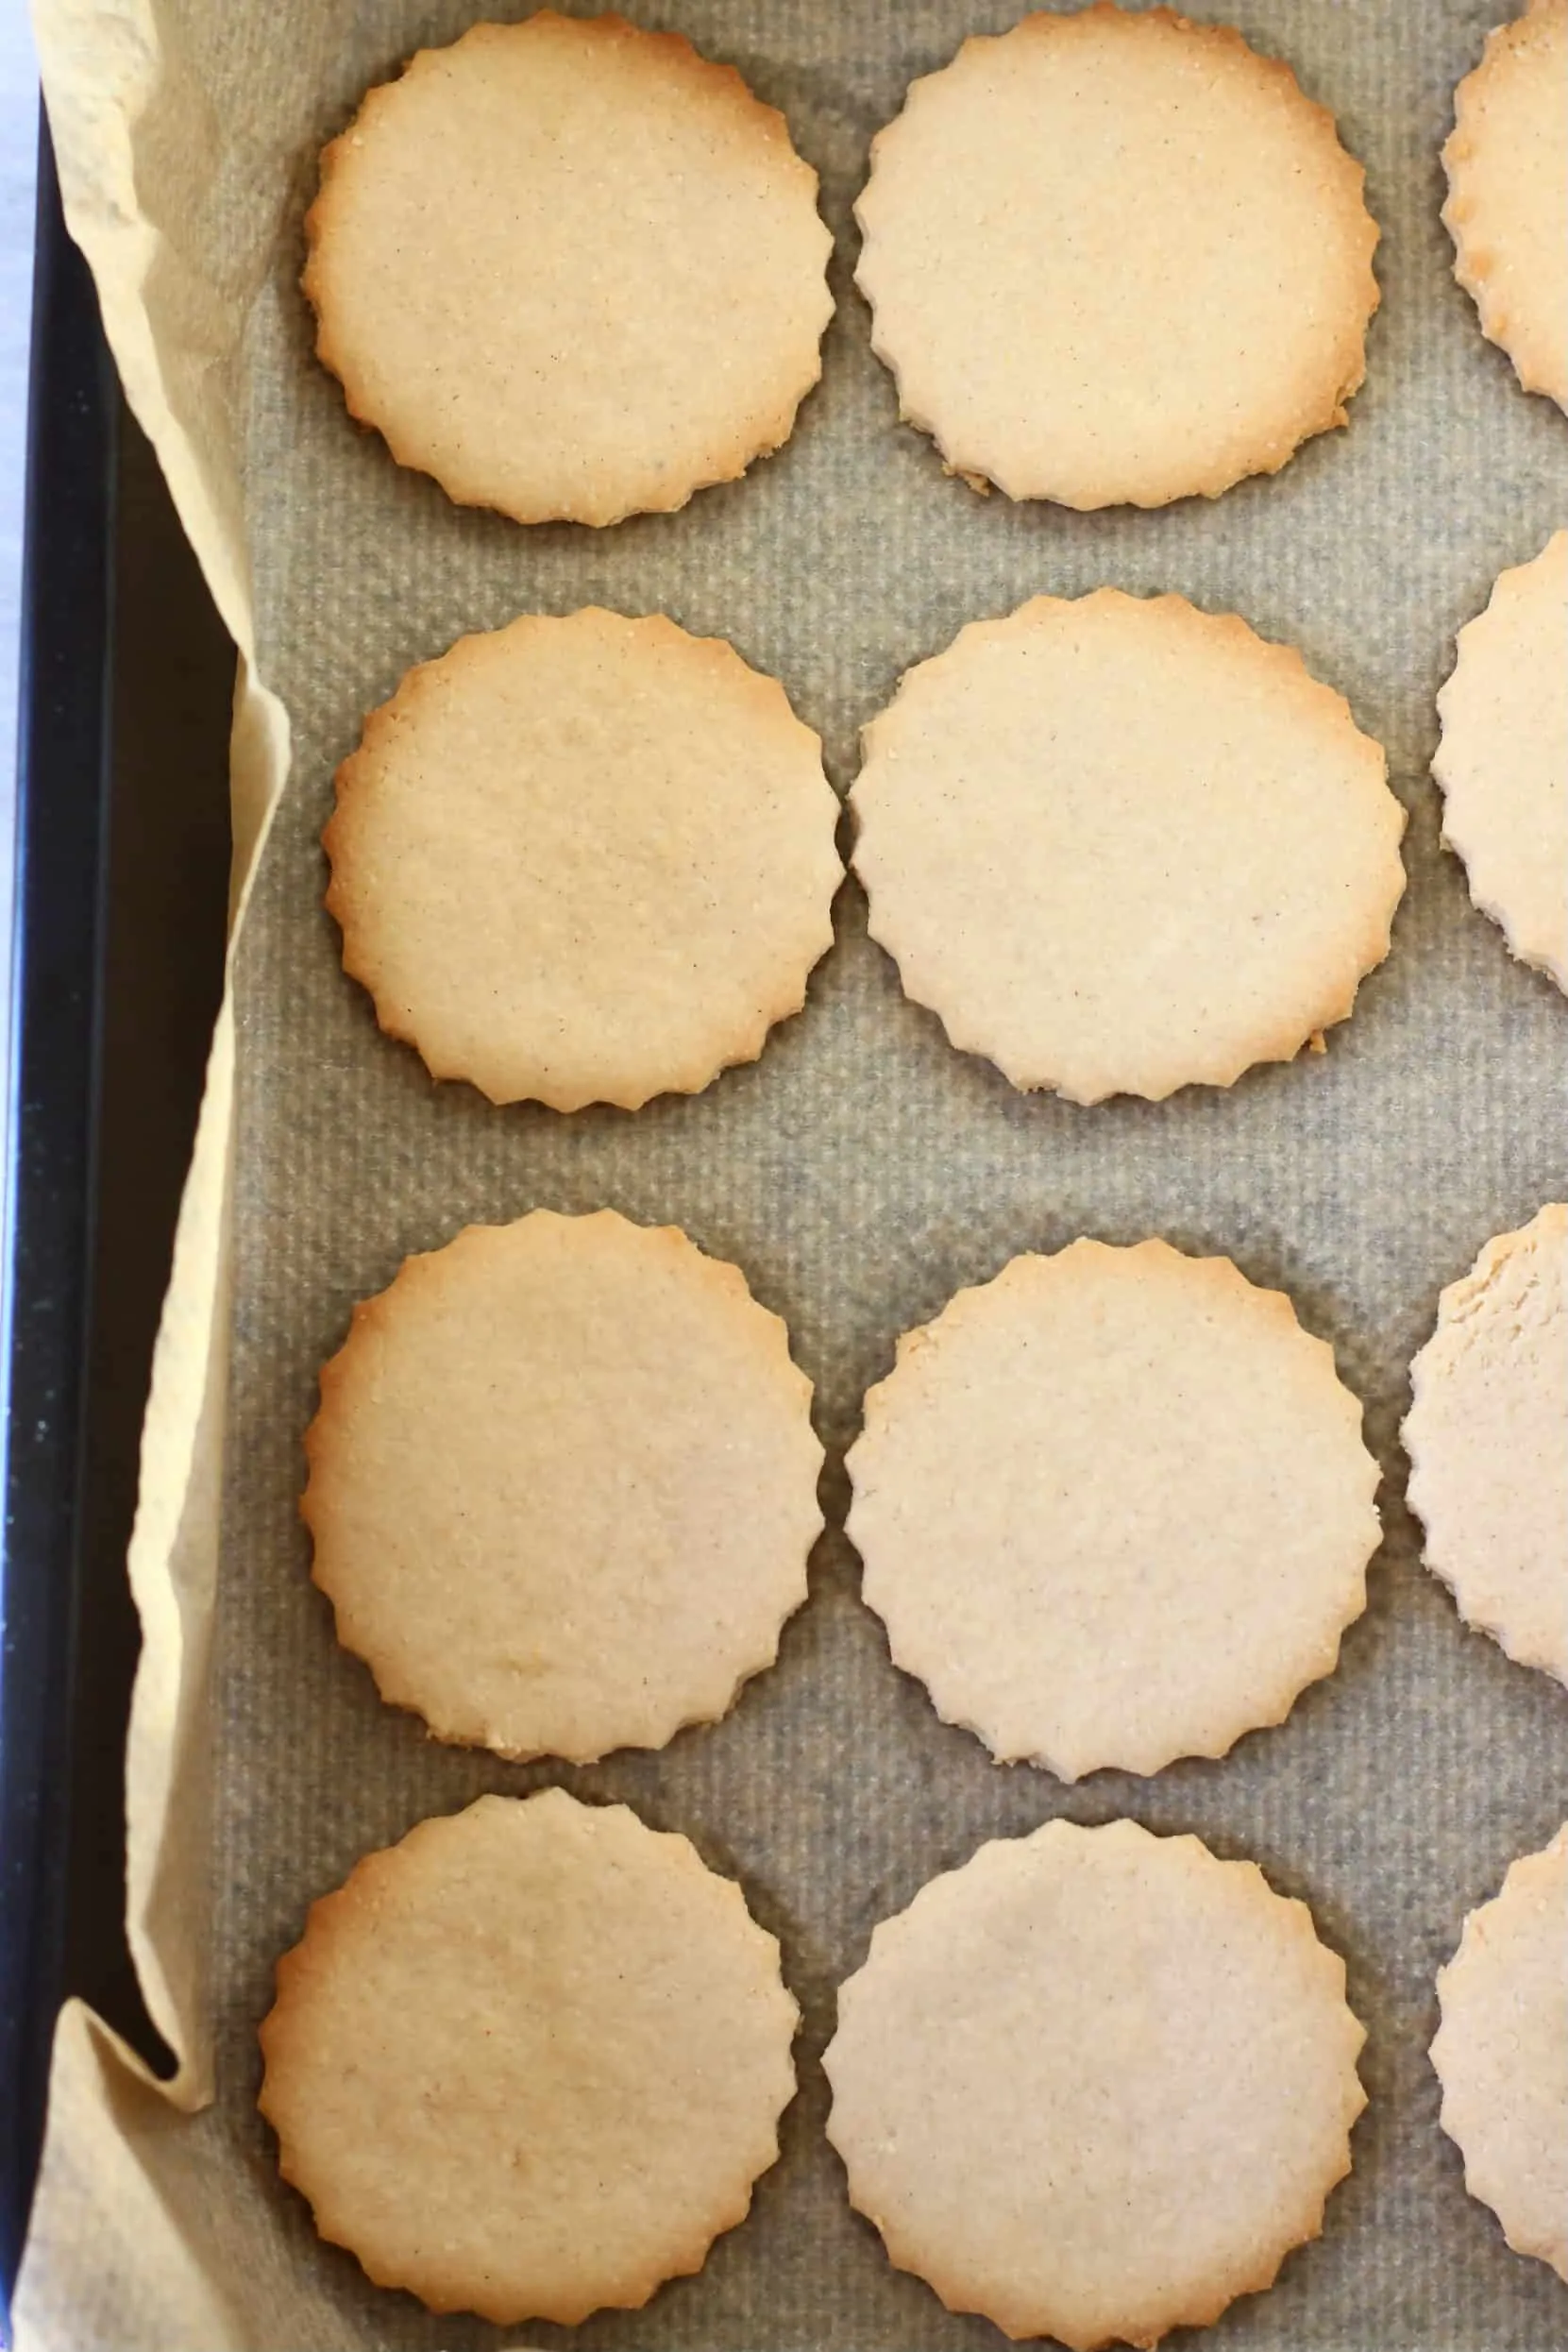 Eight gluten-free vegan linzer cookie circles on a baking tray lined with baking paper